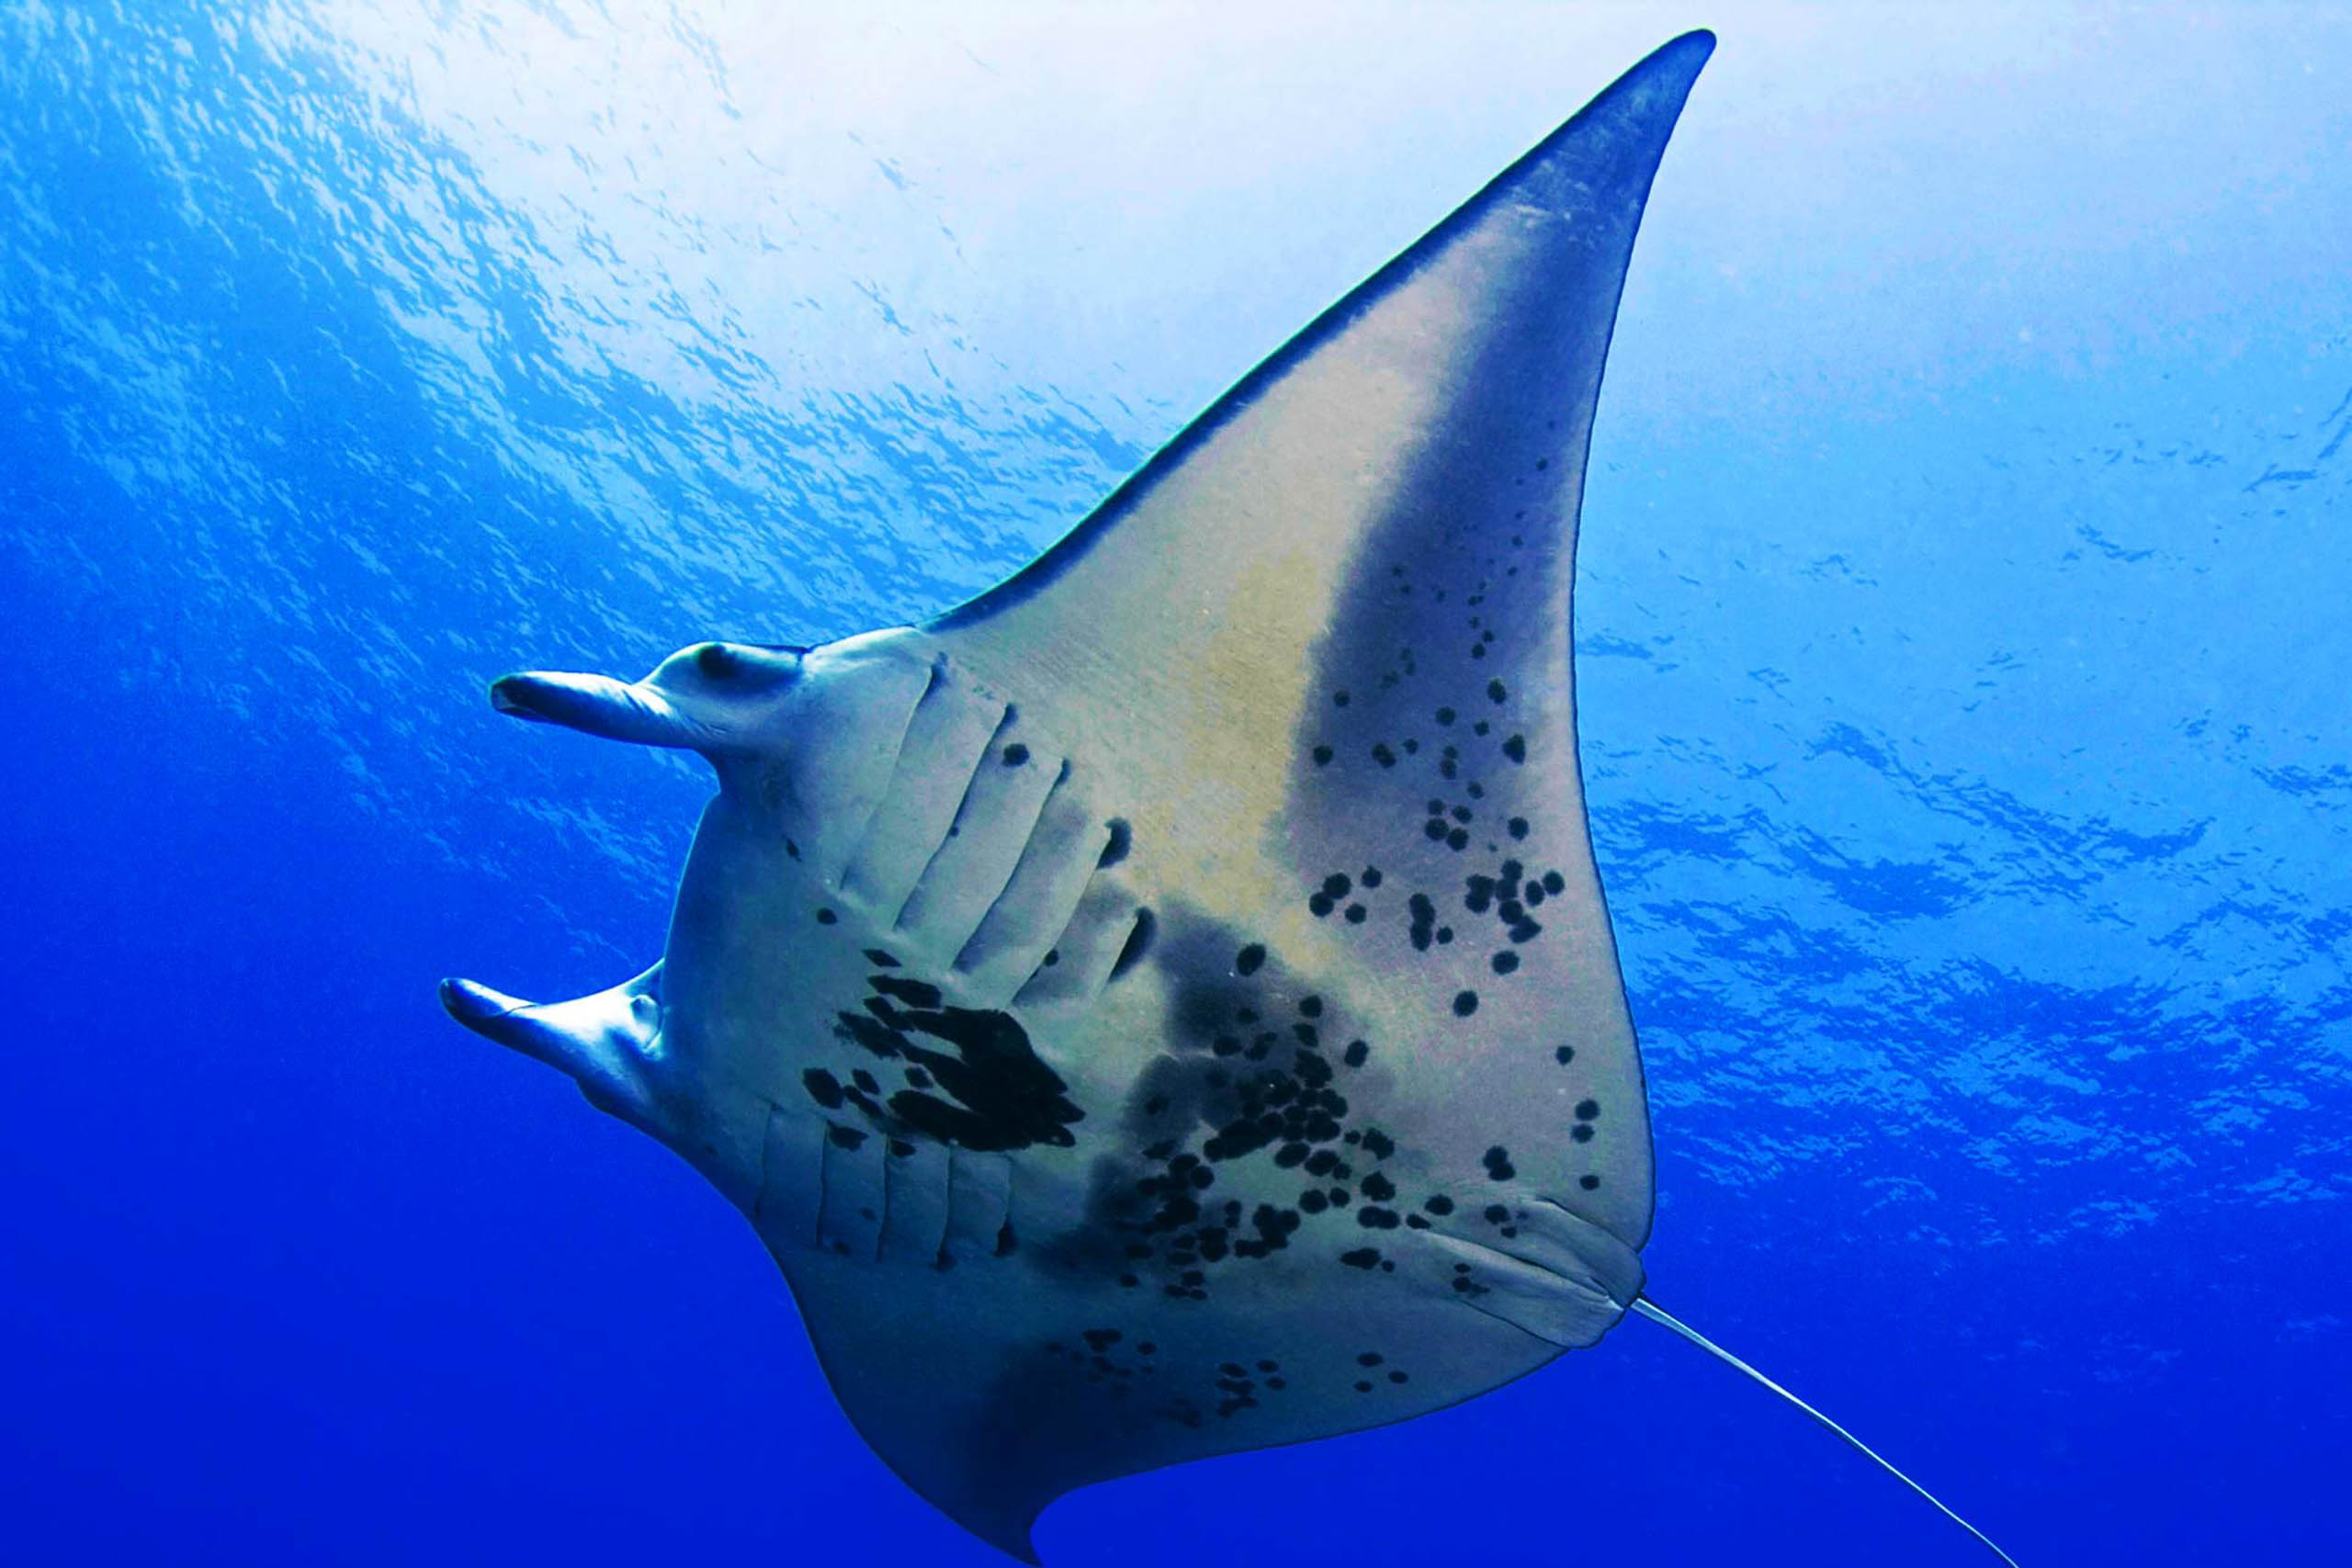 https://www.hawaiitours.com/wp-content/uploads/2020/02/manta-rays-gentle-giants-of-the-sea-and-snorkeling-with-them-is-an-unforgettable-experience-ocean-encounters-big-island-1.jpg